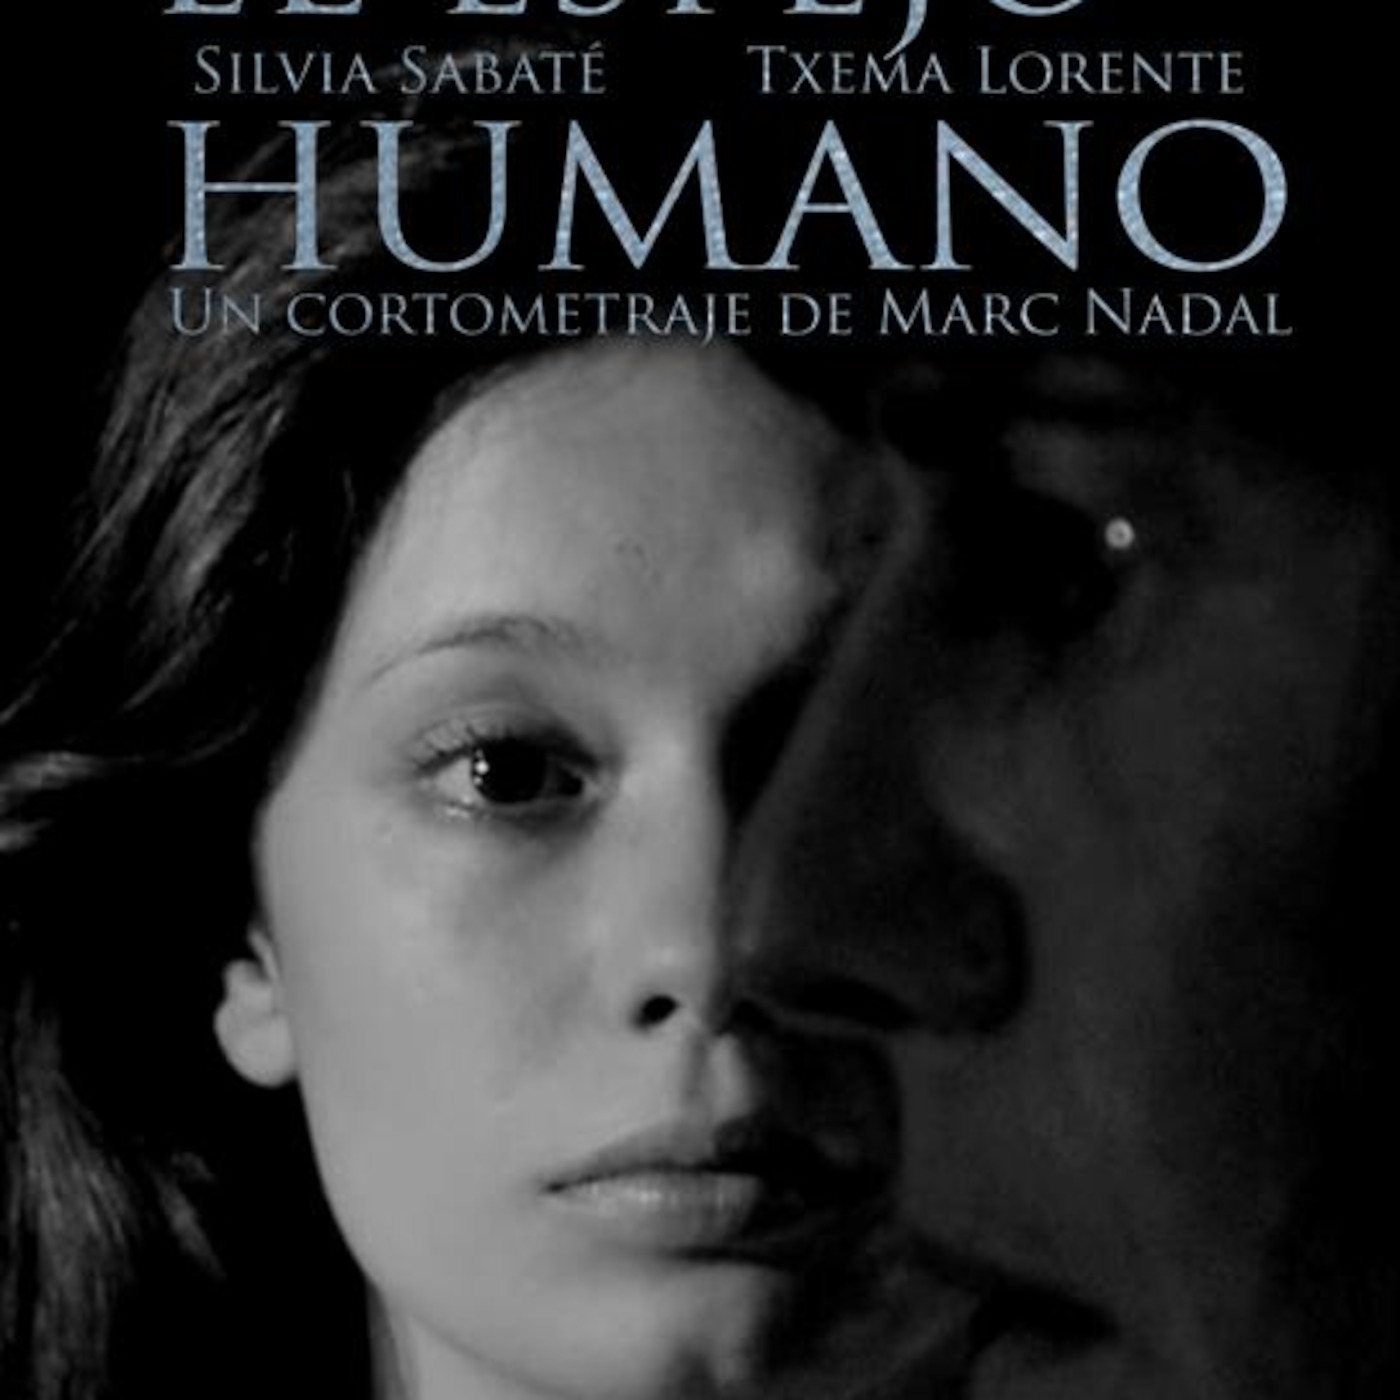 “The human mirror” short film directed by Marc Nadal.